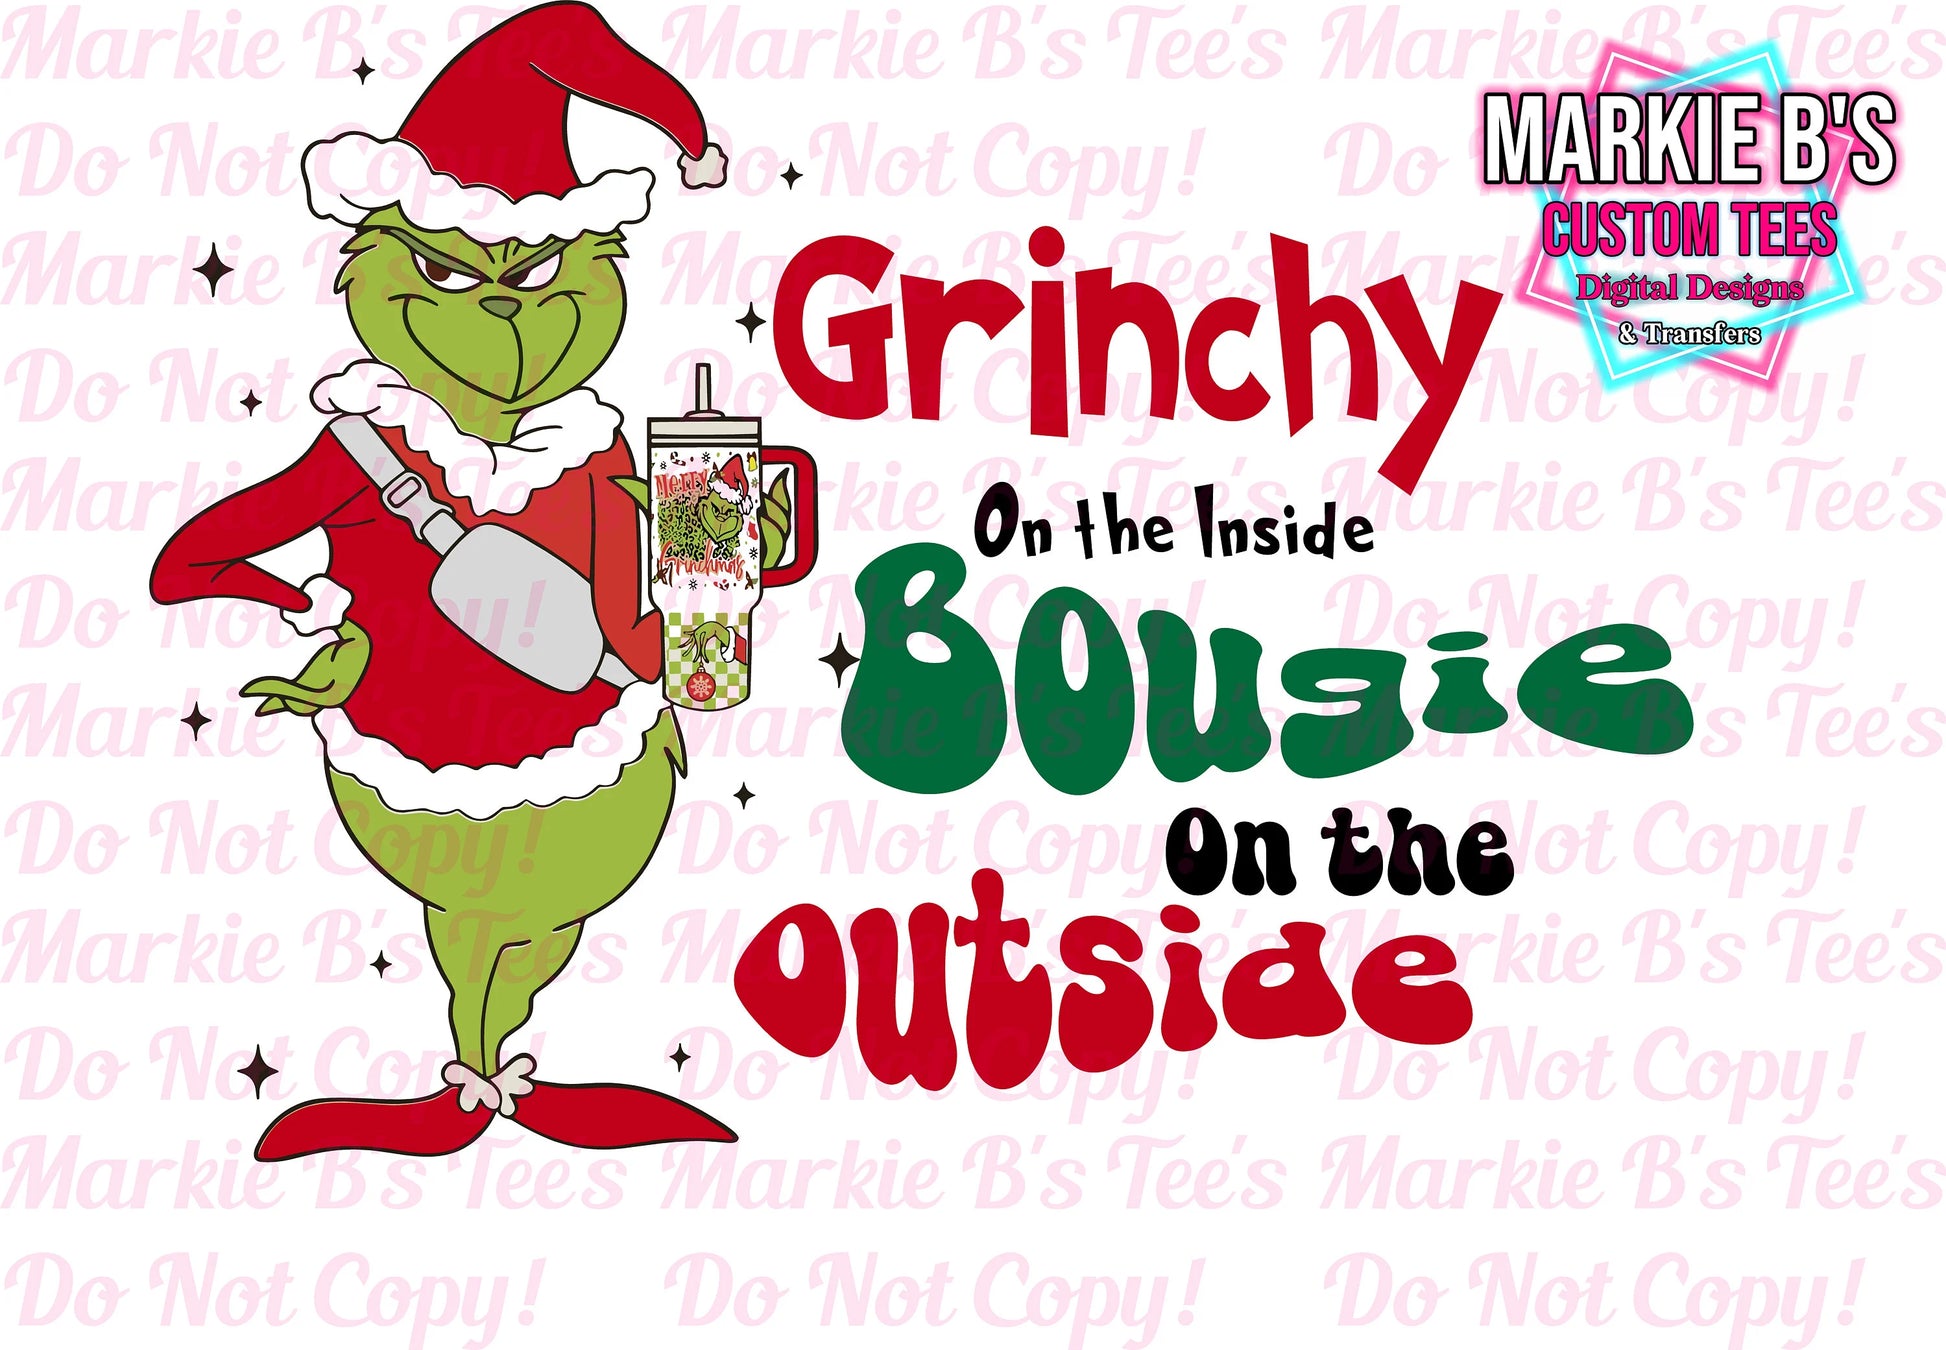 Mr. Green Grinchy On the Inside, Bougie on the Outside, Markie B's Tees